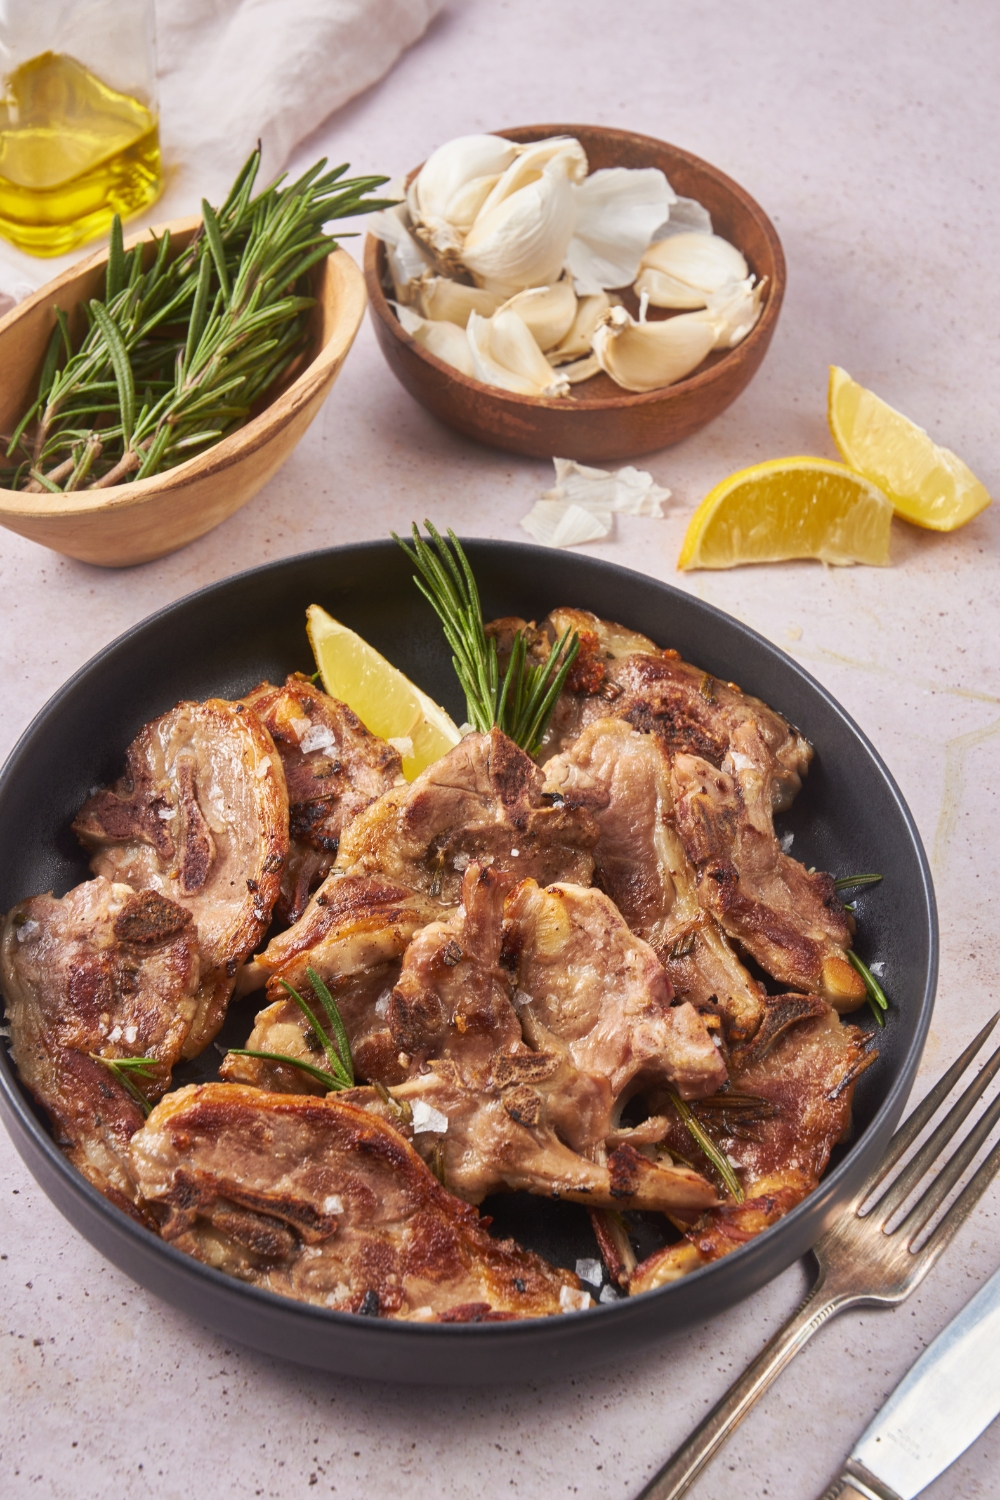 A plate of cooked baby lamb chops piled on top of each other, garnished with sea salt and fresh herbs and a lemon wedge. Next to the plate is a fork, knife, and bowls of garlic and rosemary.